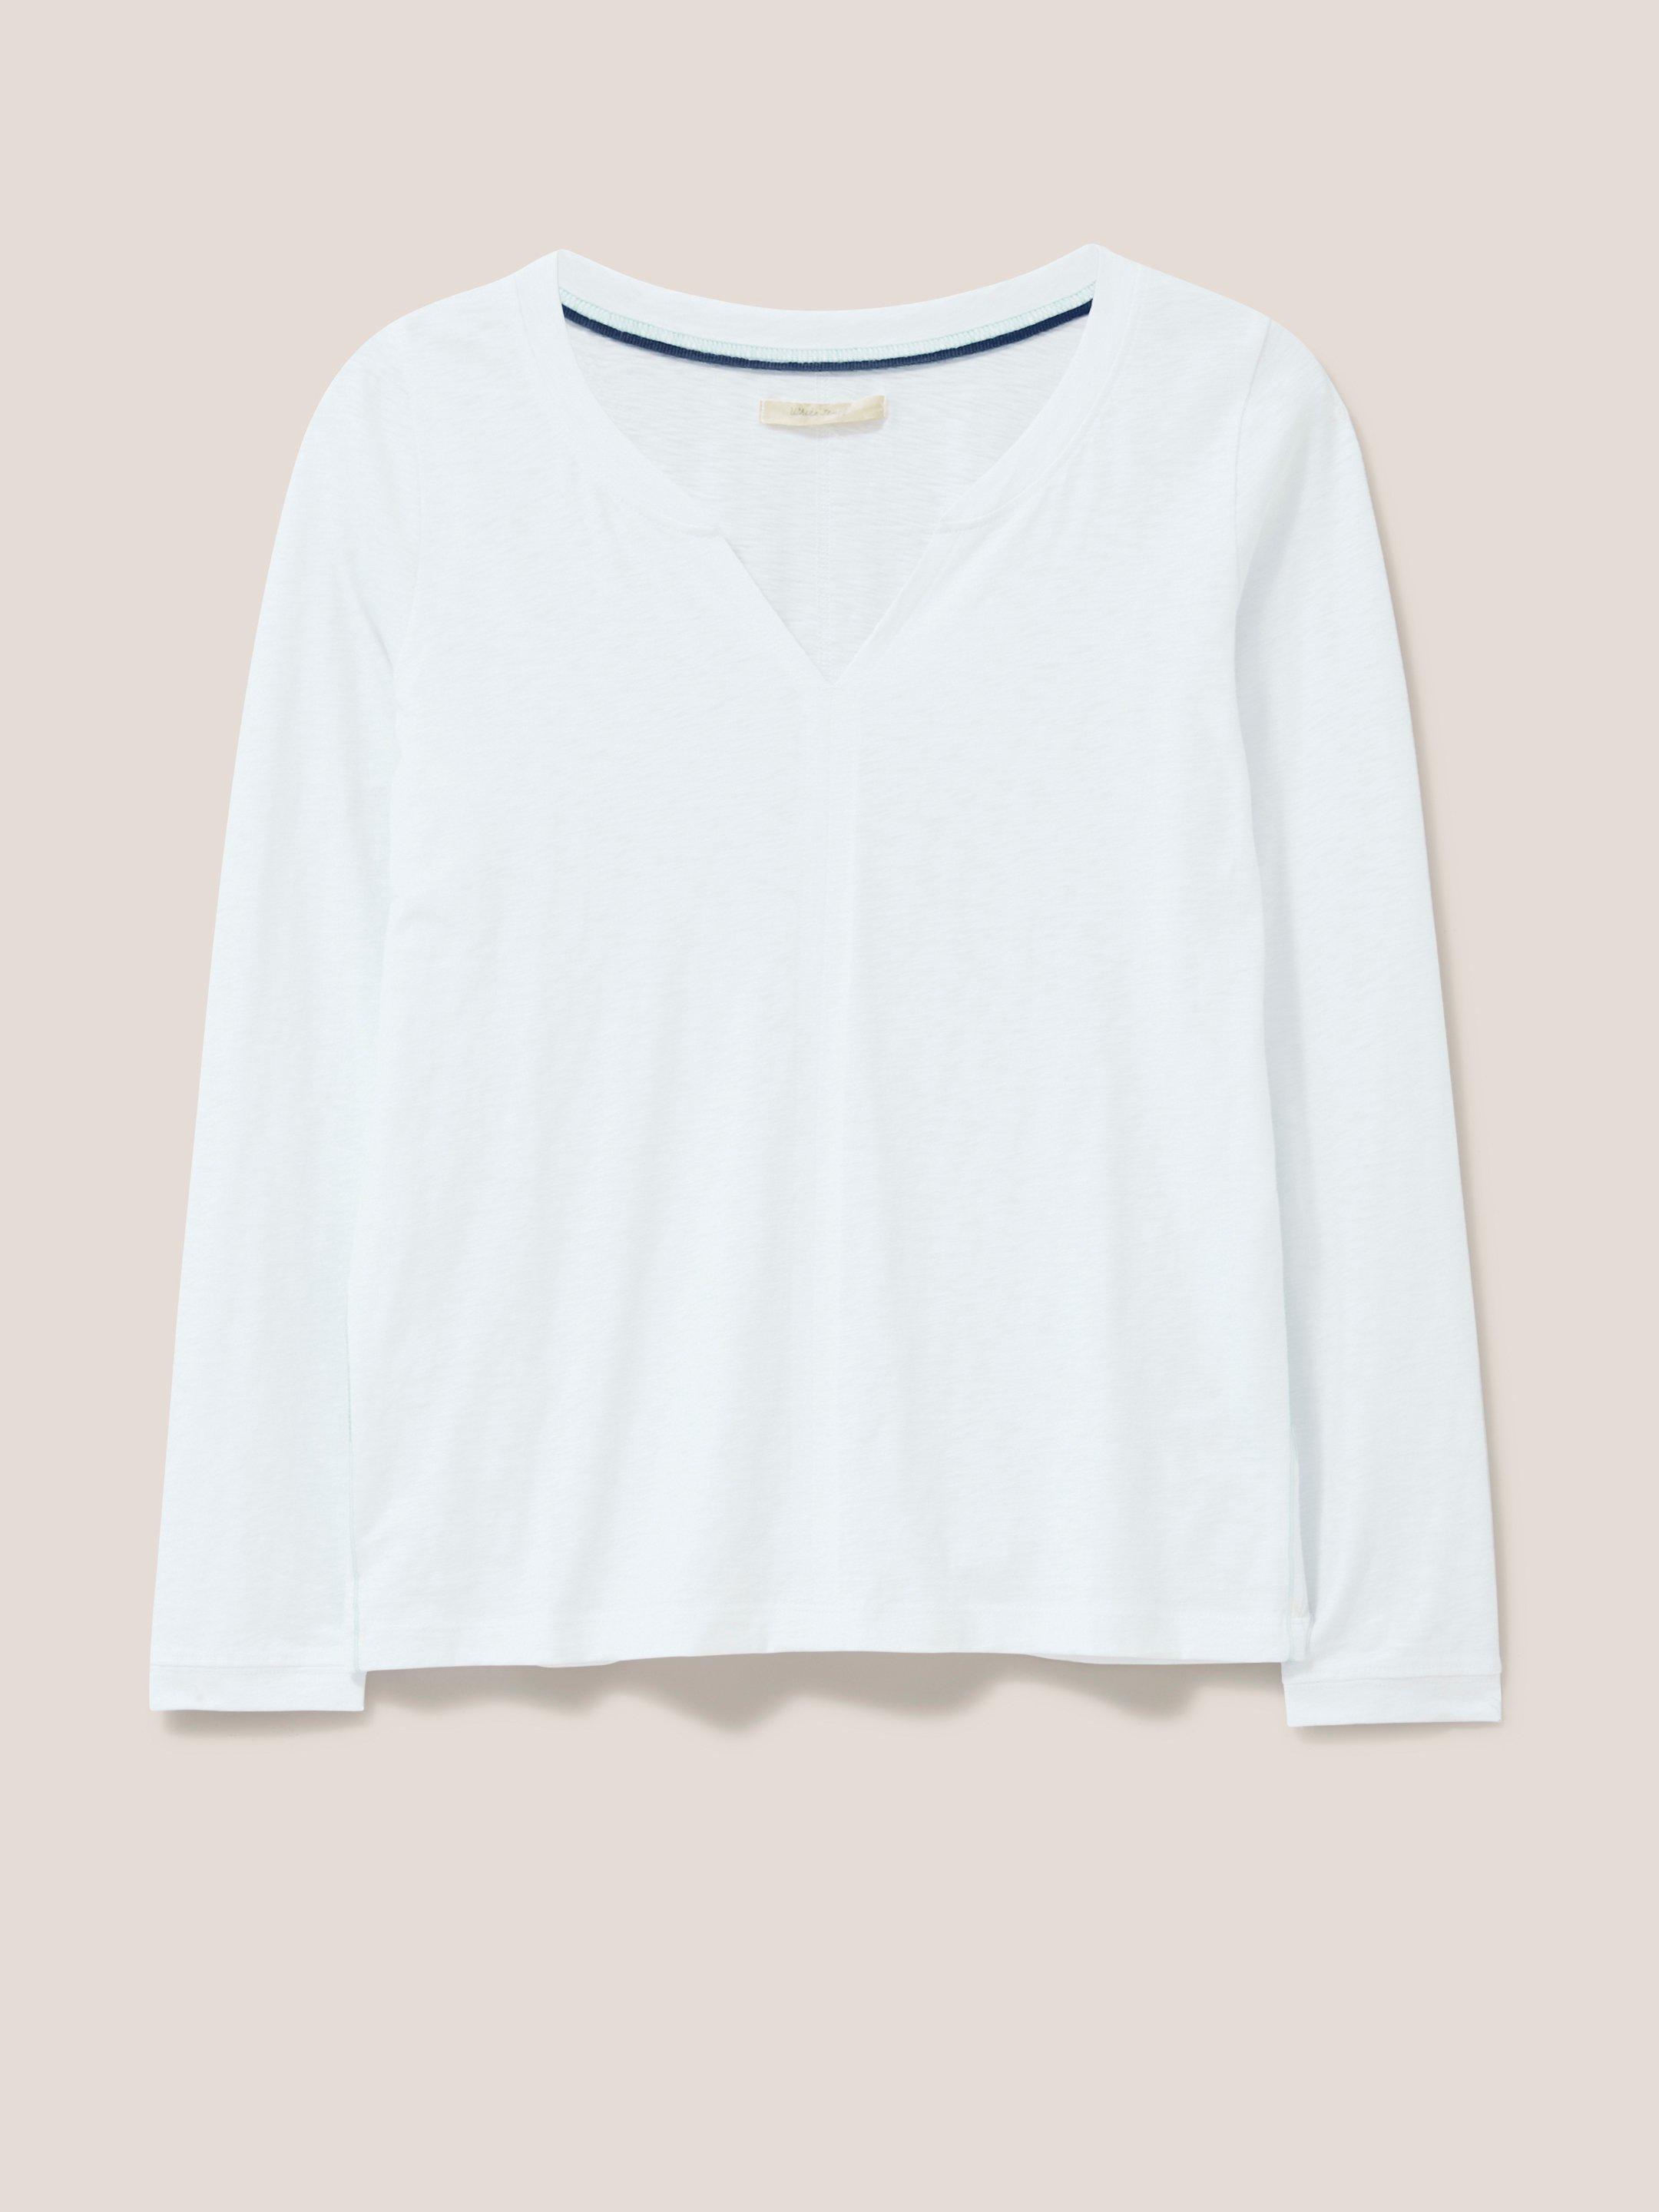 Nelly LS Tee in BRIL WHITE - FLAT FRONT